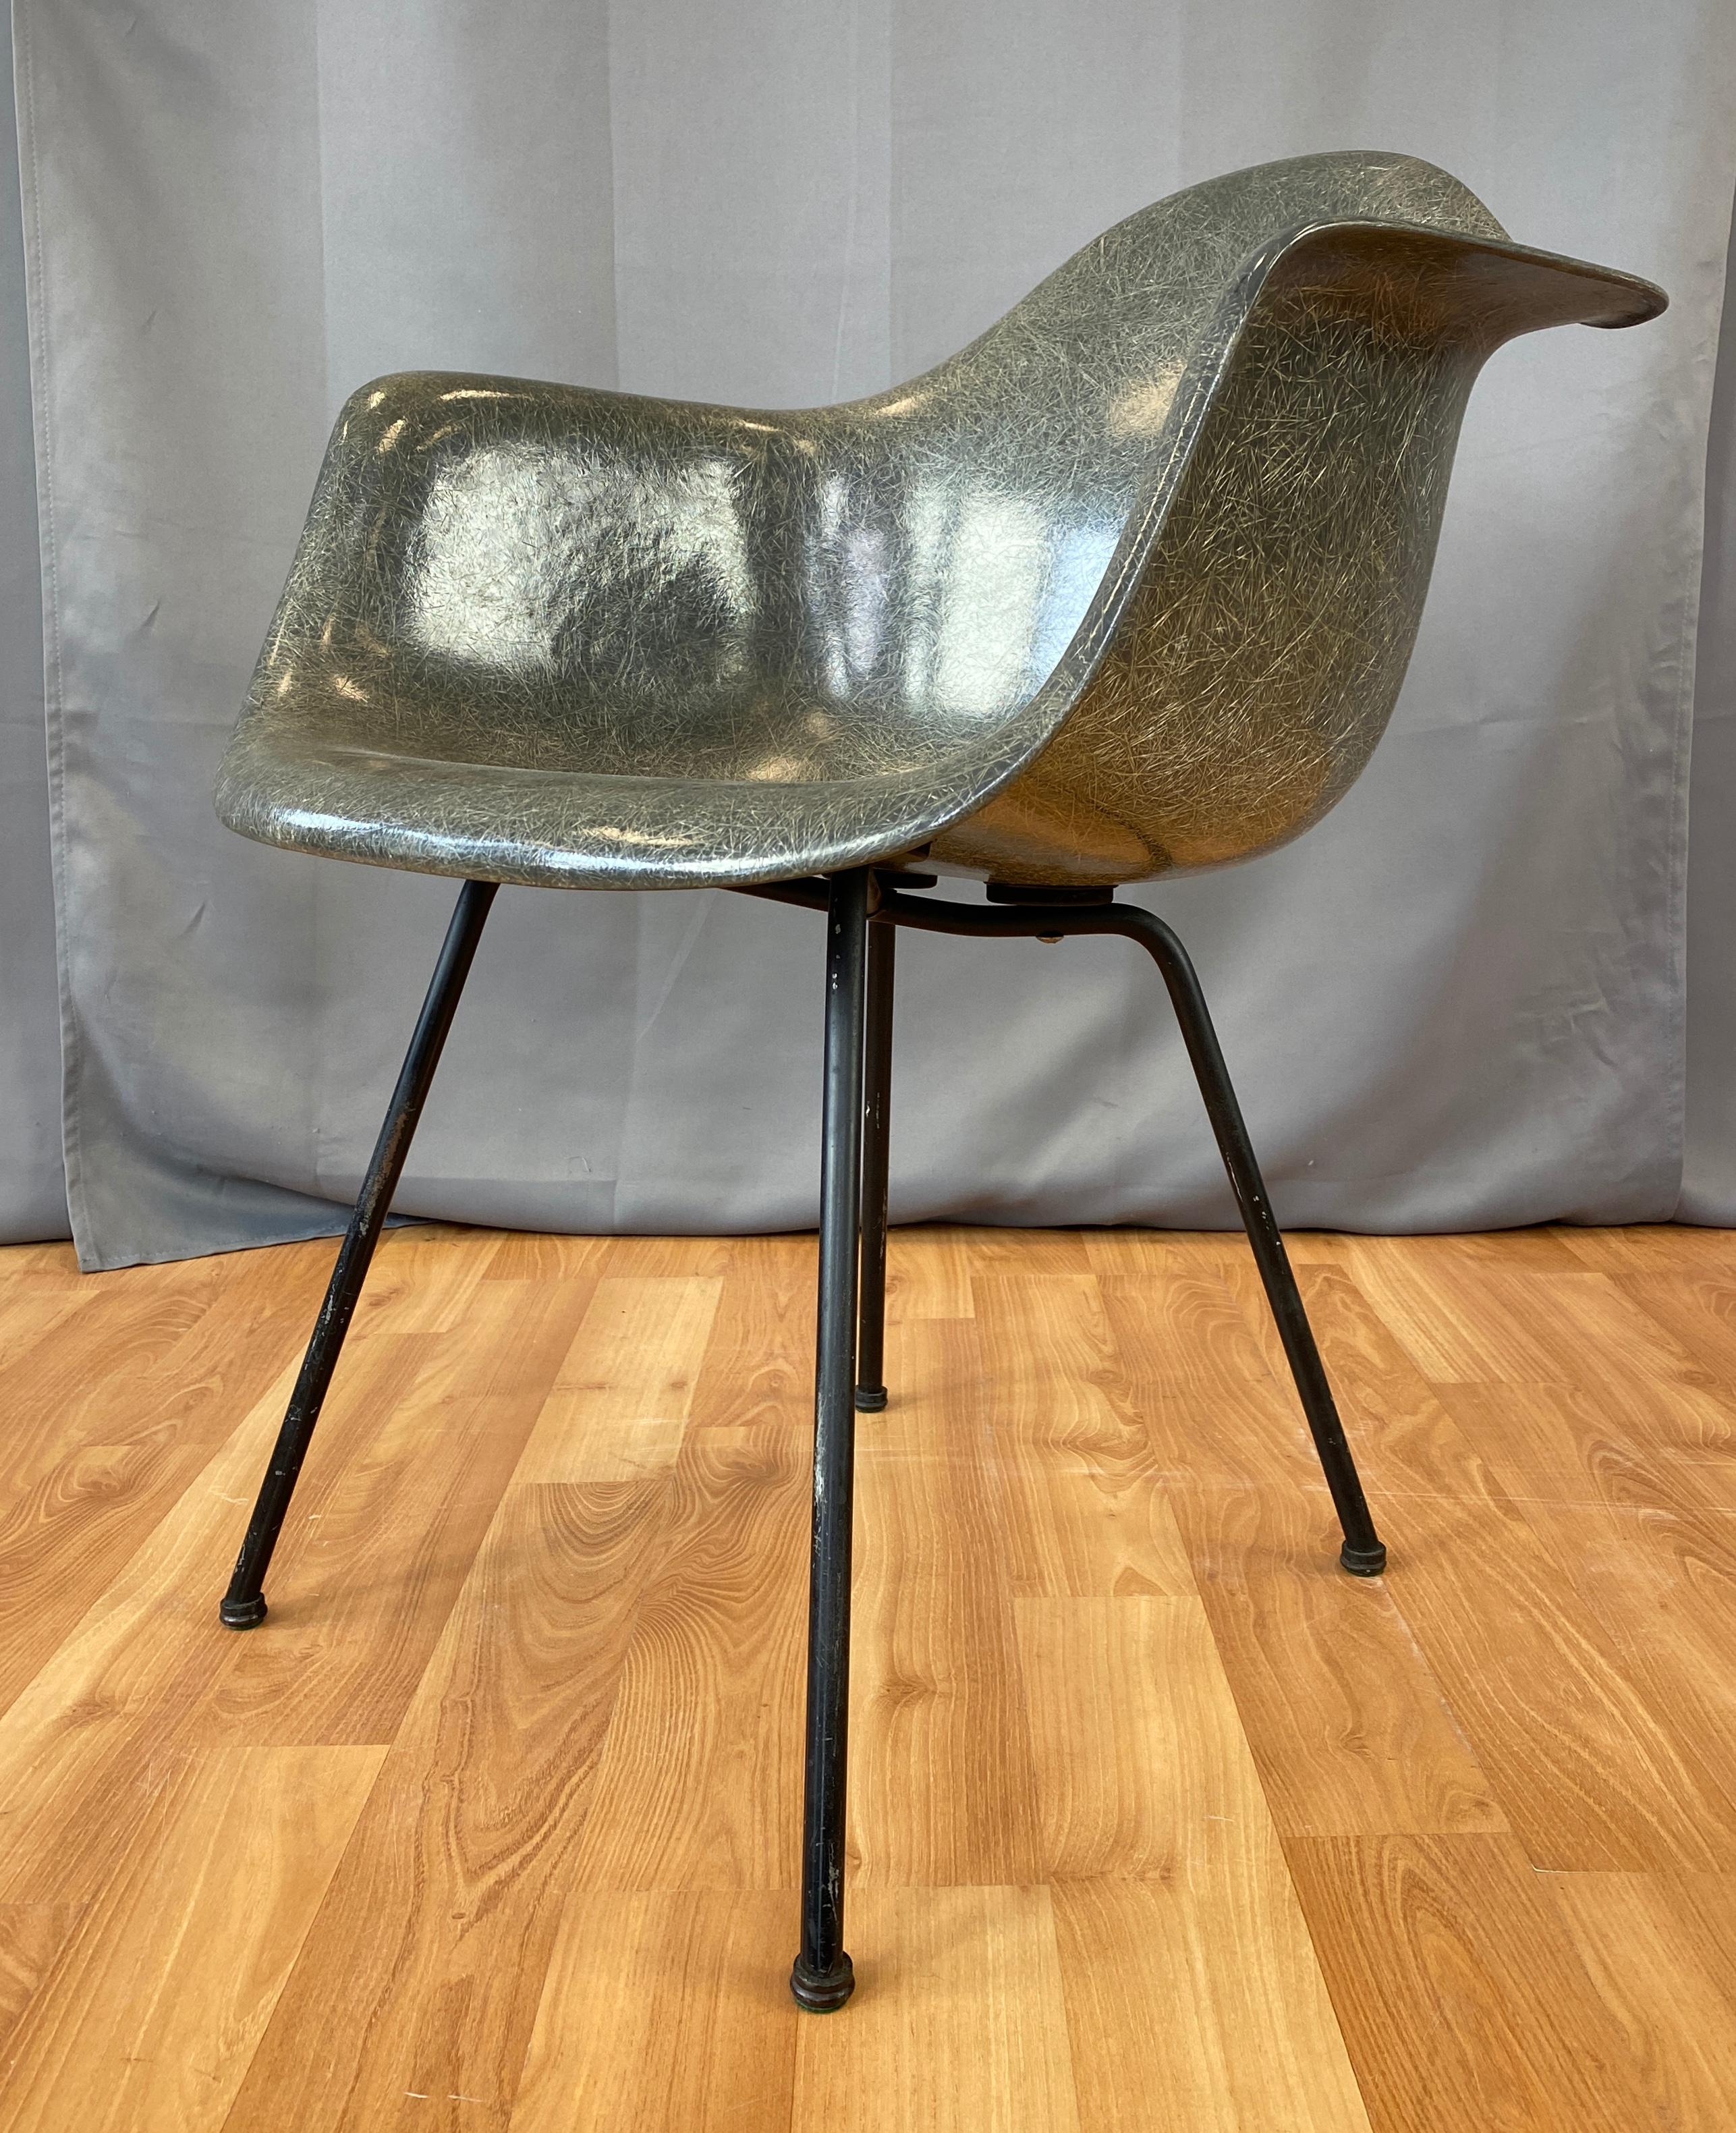 Offered here is a 1st generation Zenith Plastics Co rope edge chair, designed by Charles Eames for Herman Miller.
Chair is in an elephant hide gray.